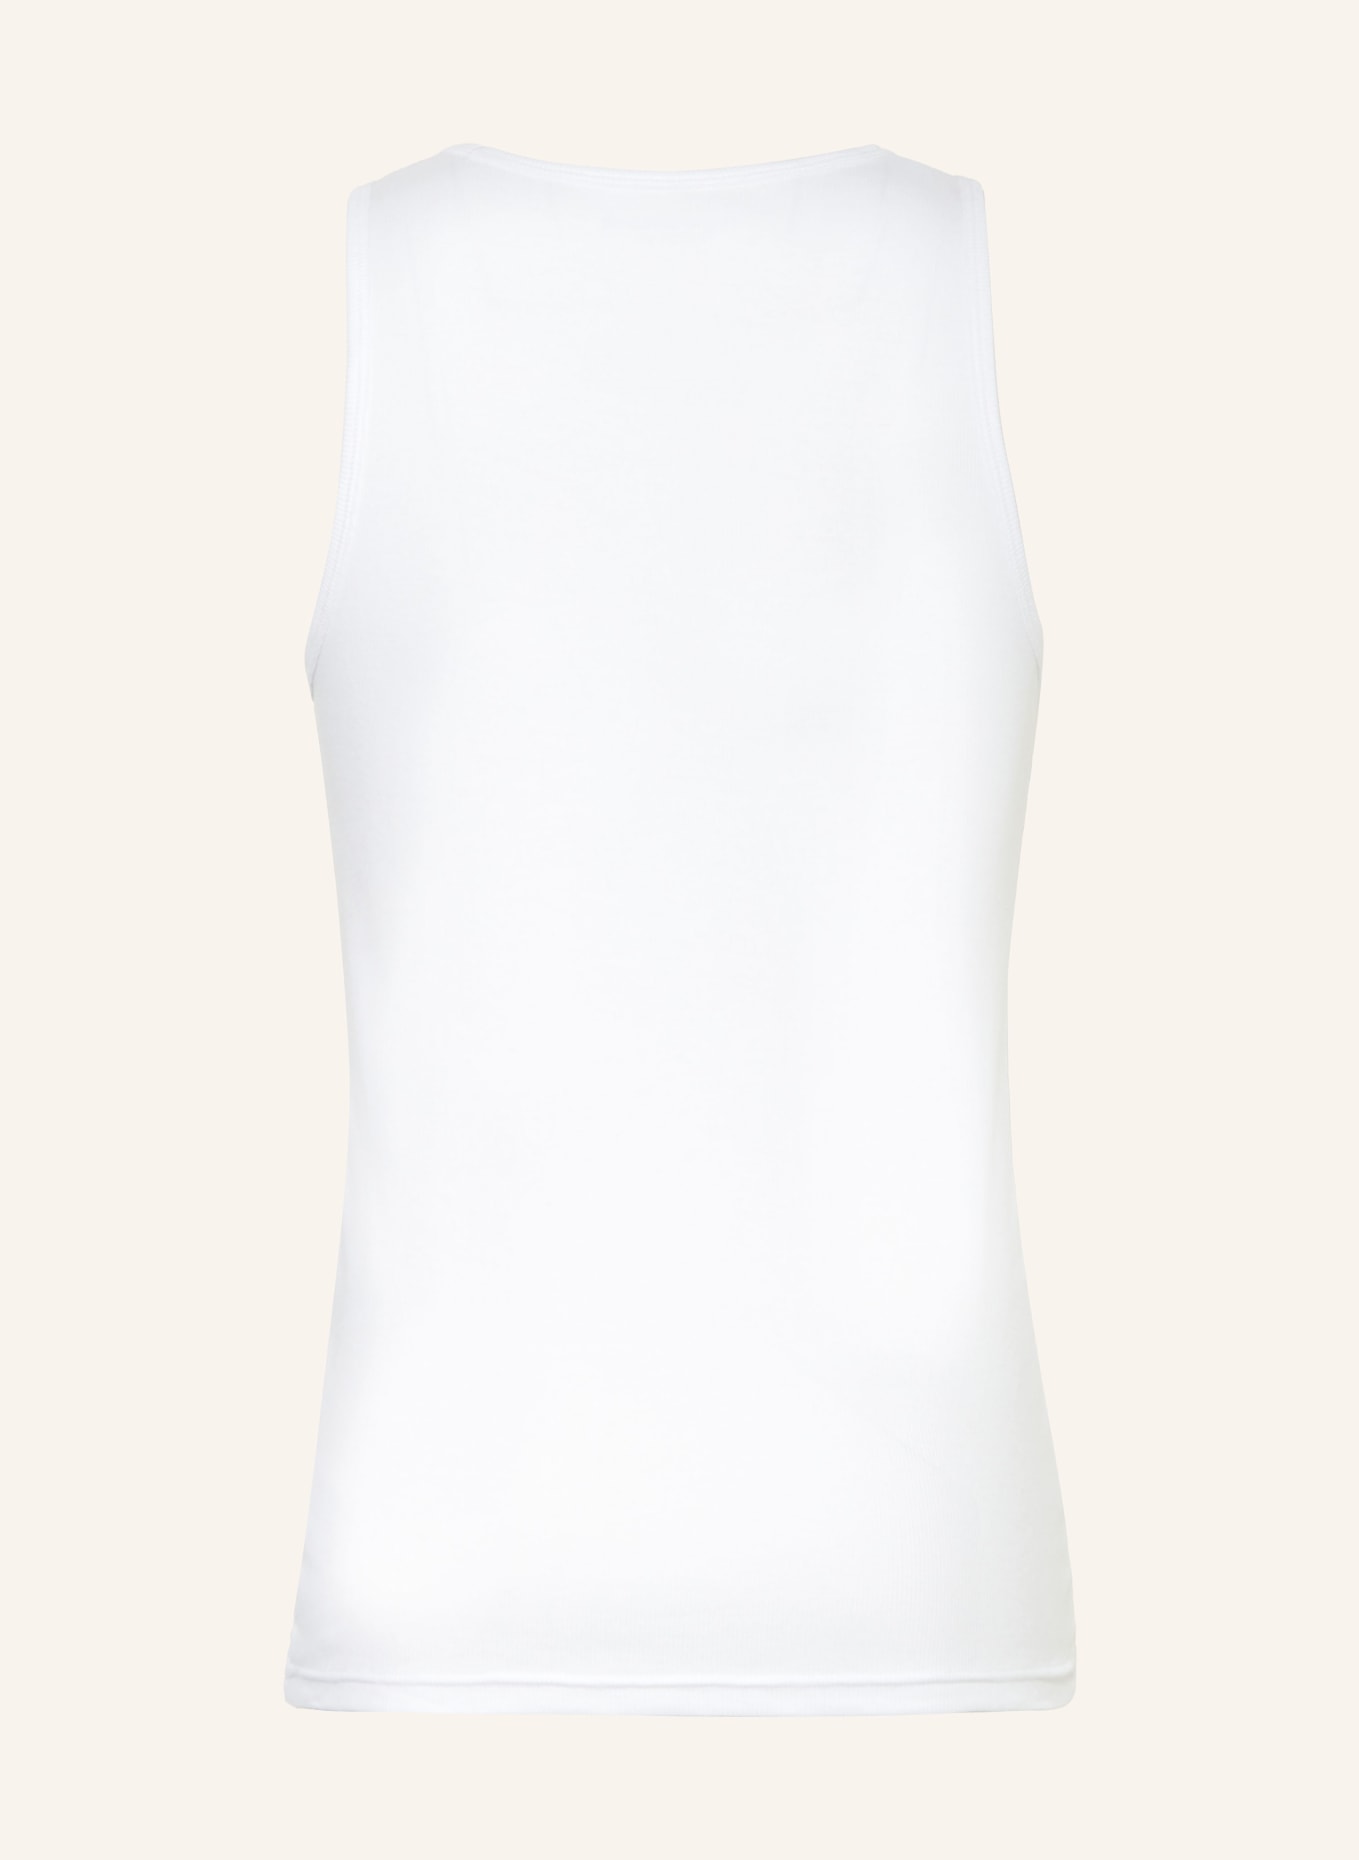 TOMMY HILFIGER 3-pack undershirts, Color: WHITE (Image 2)